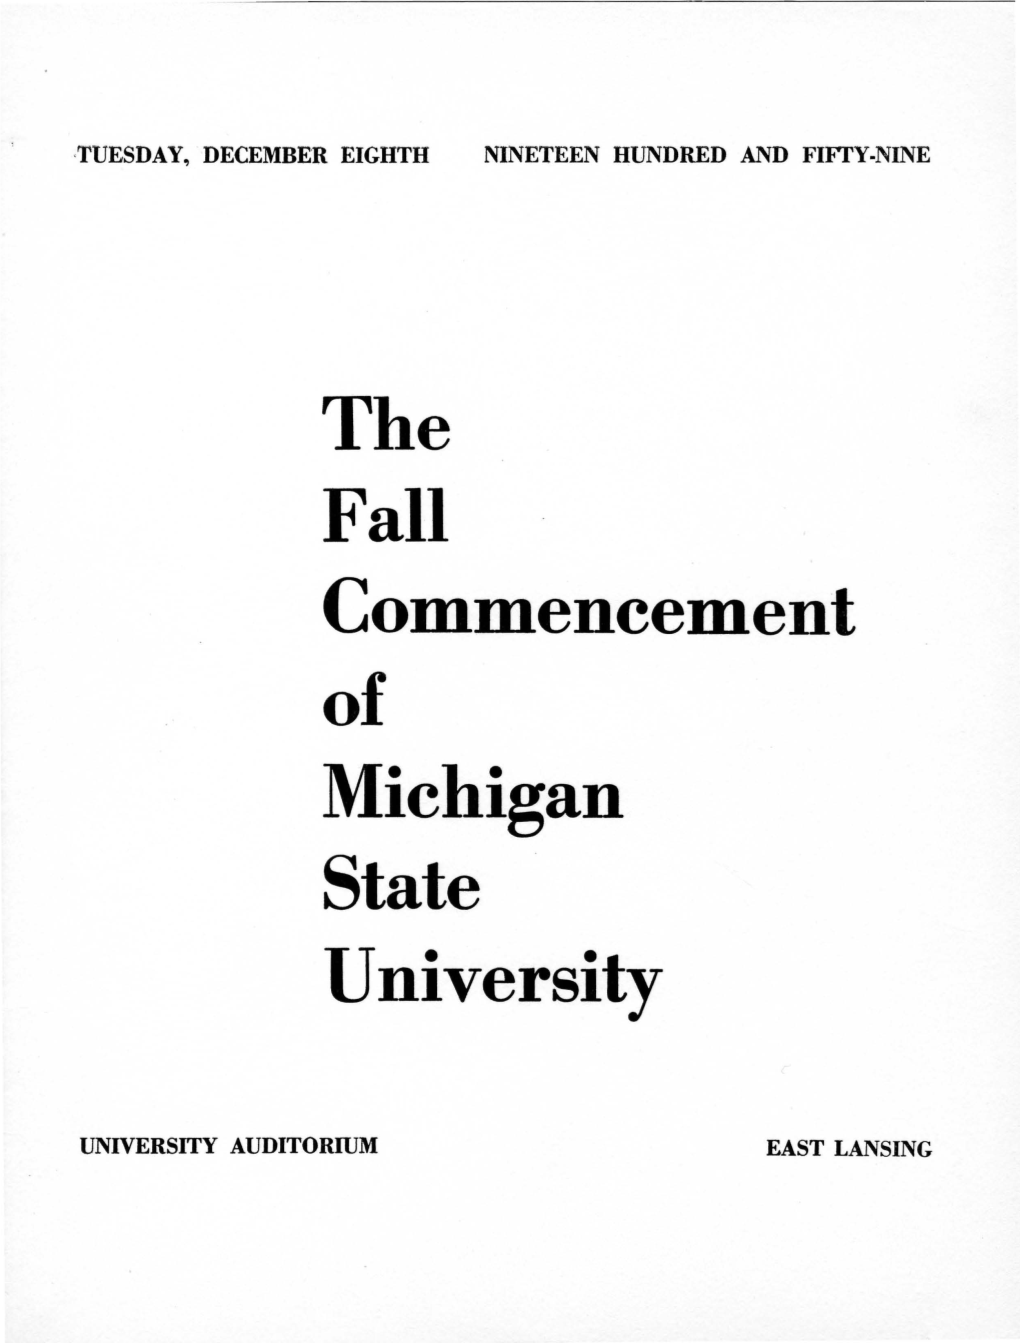 The Commencement of Michigan State University